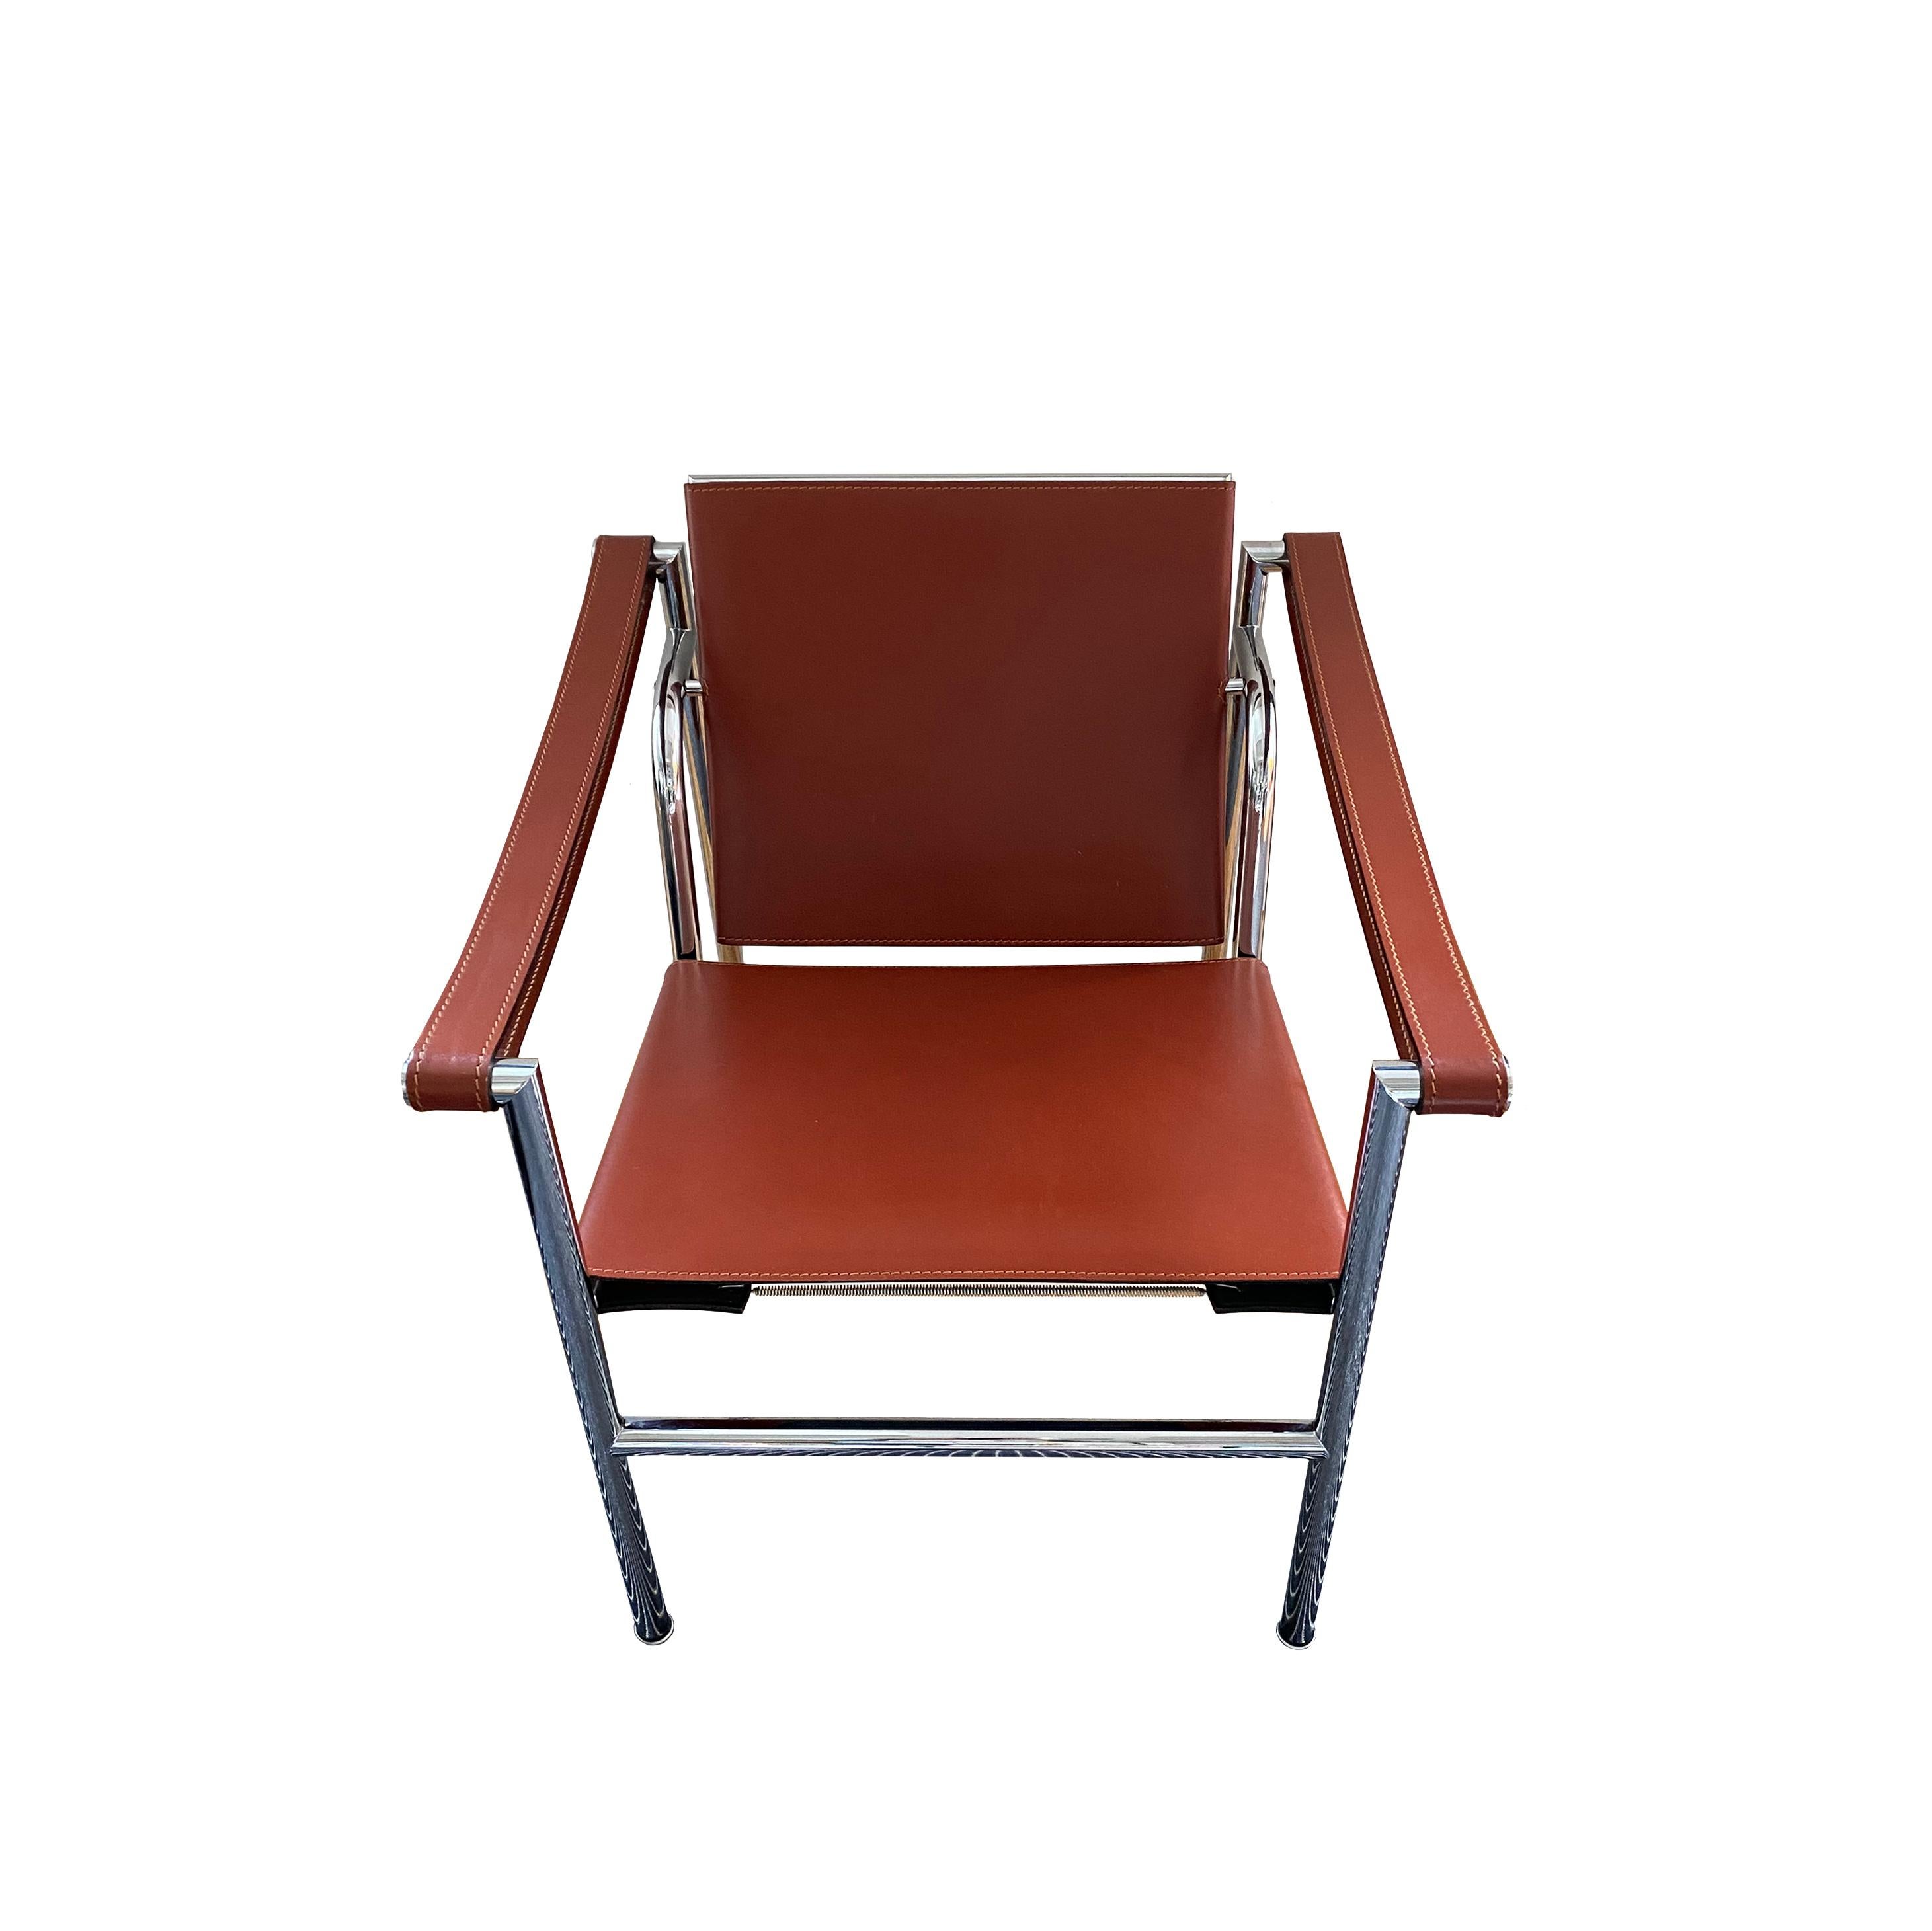 From the Lumifer Gallery Collection.

LC1 - Sling chair, originally titled Basculant, originally designed in 1928.

Leather, polished chrome steel.
Manufactured by Cassina
 